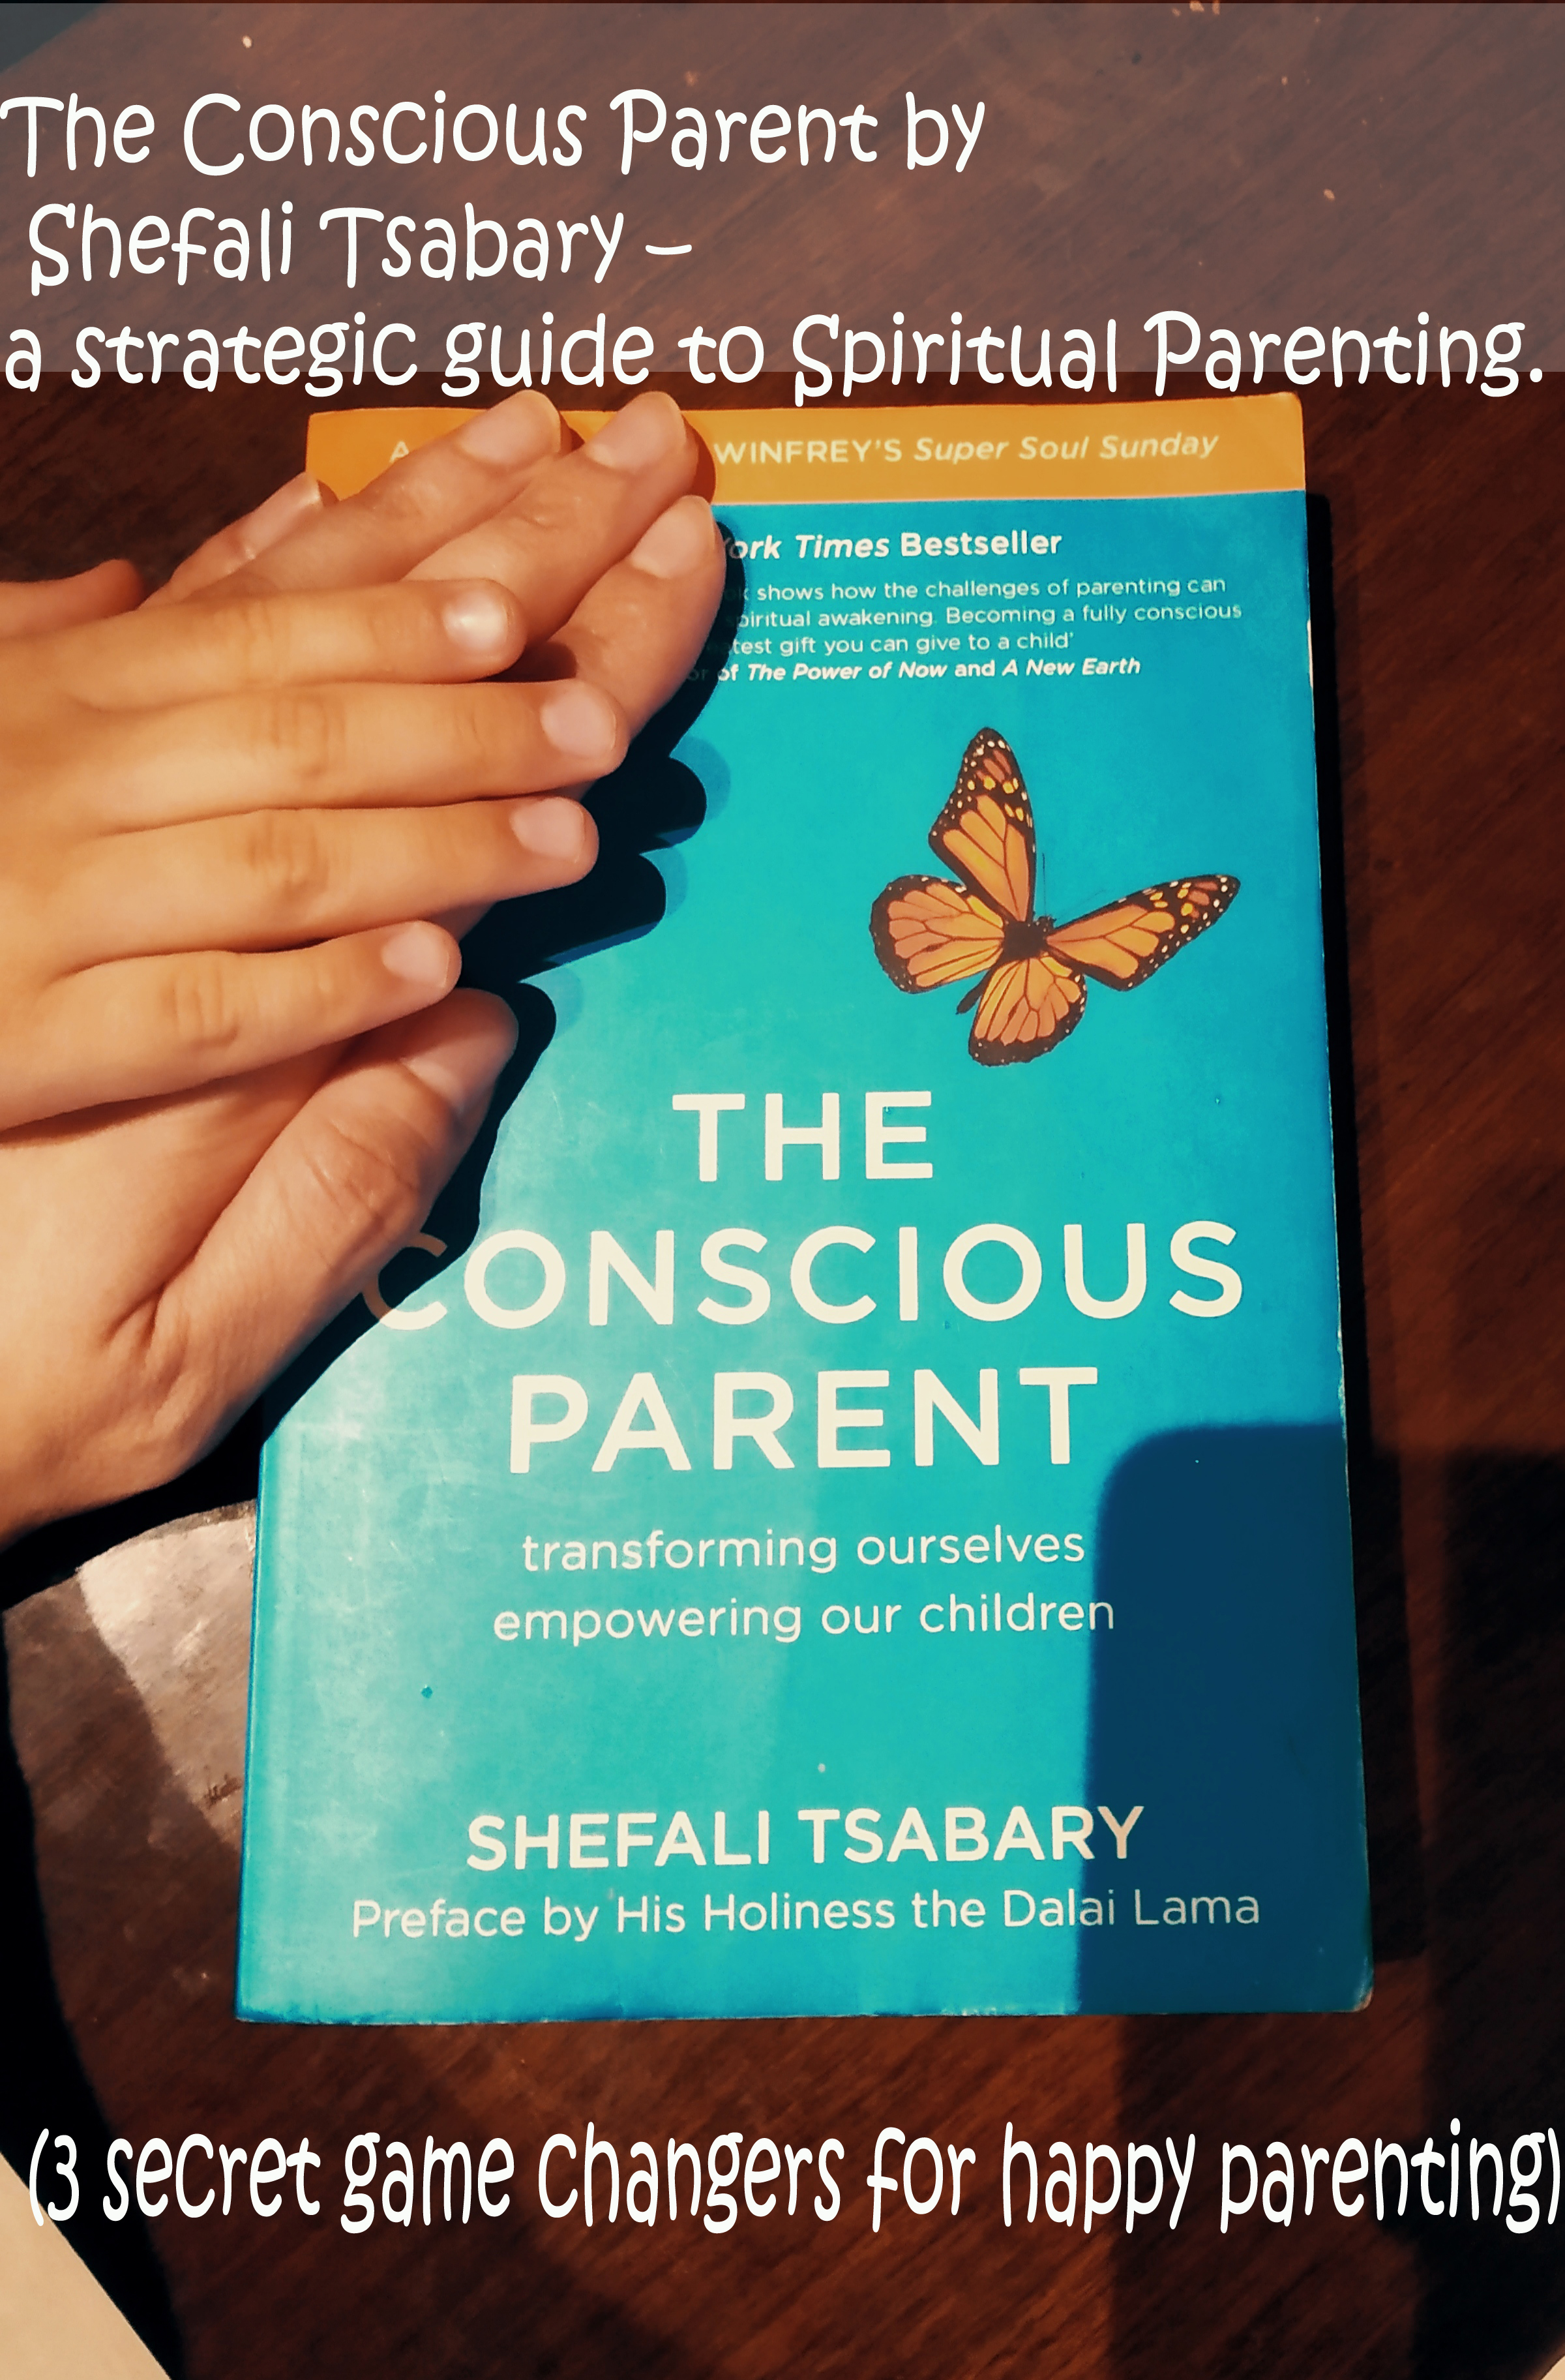 ‘THE CONSCIOUS PARENT’ by SHEFALI TSABARY – a strategic guide to Spiritual Parenting.  (3 secret game changers for happy parenting)